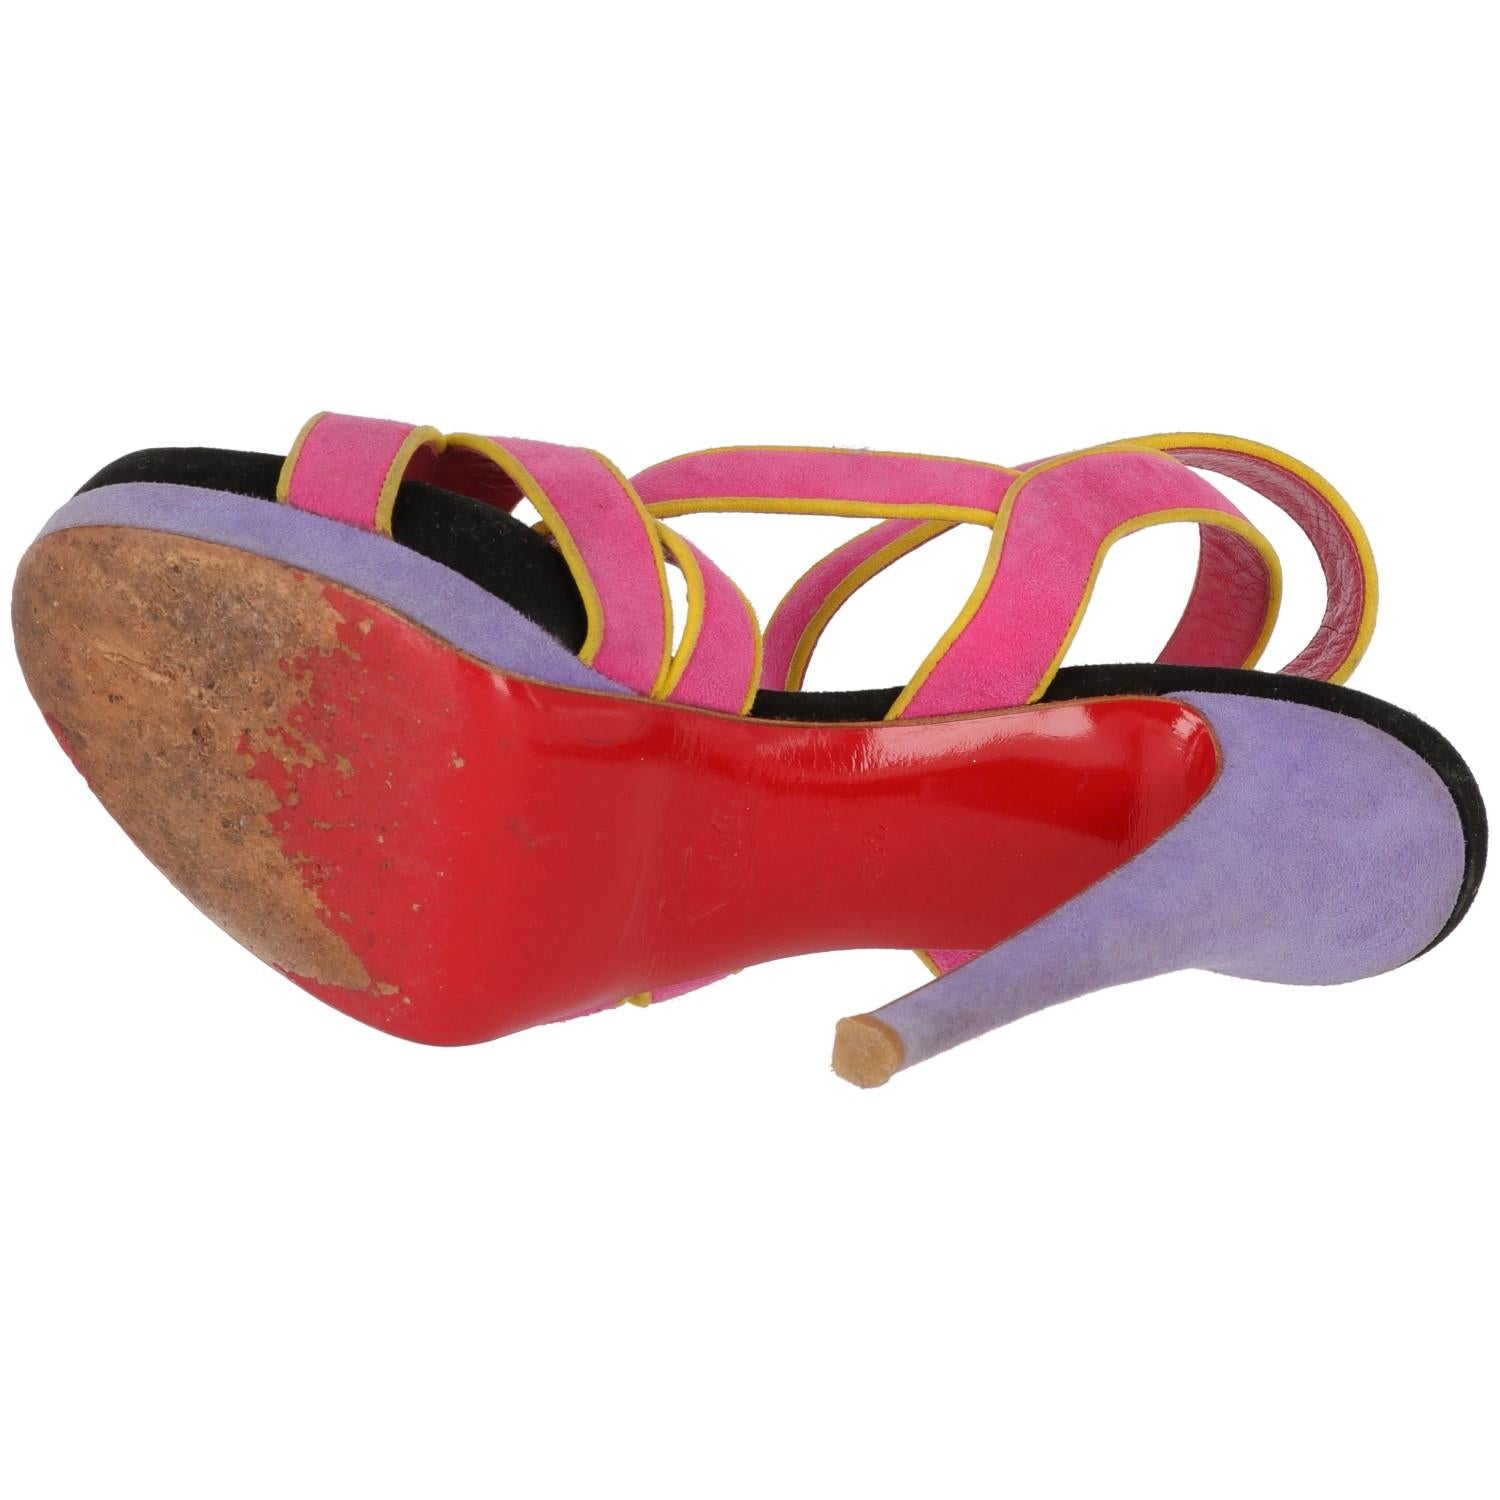 
The stylish Christian Louboutin fuchsia black and liliac suede and leather sandals feature a vertiginous 14 cm high stiletto heel, 3cm short plateau, and ankle buckle string fastening. 
The item shows some signs of wear on the soles, as shown in